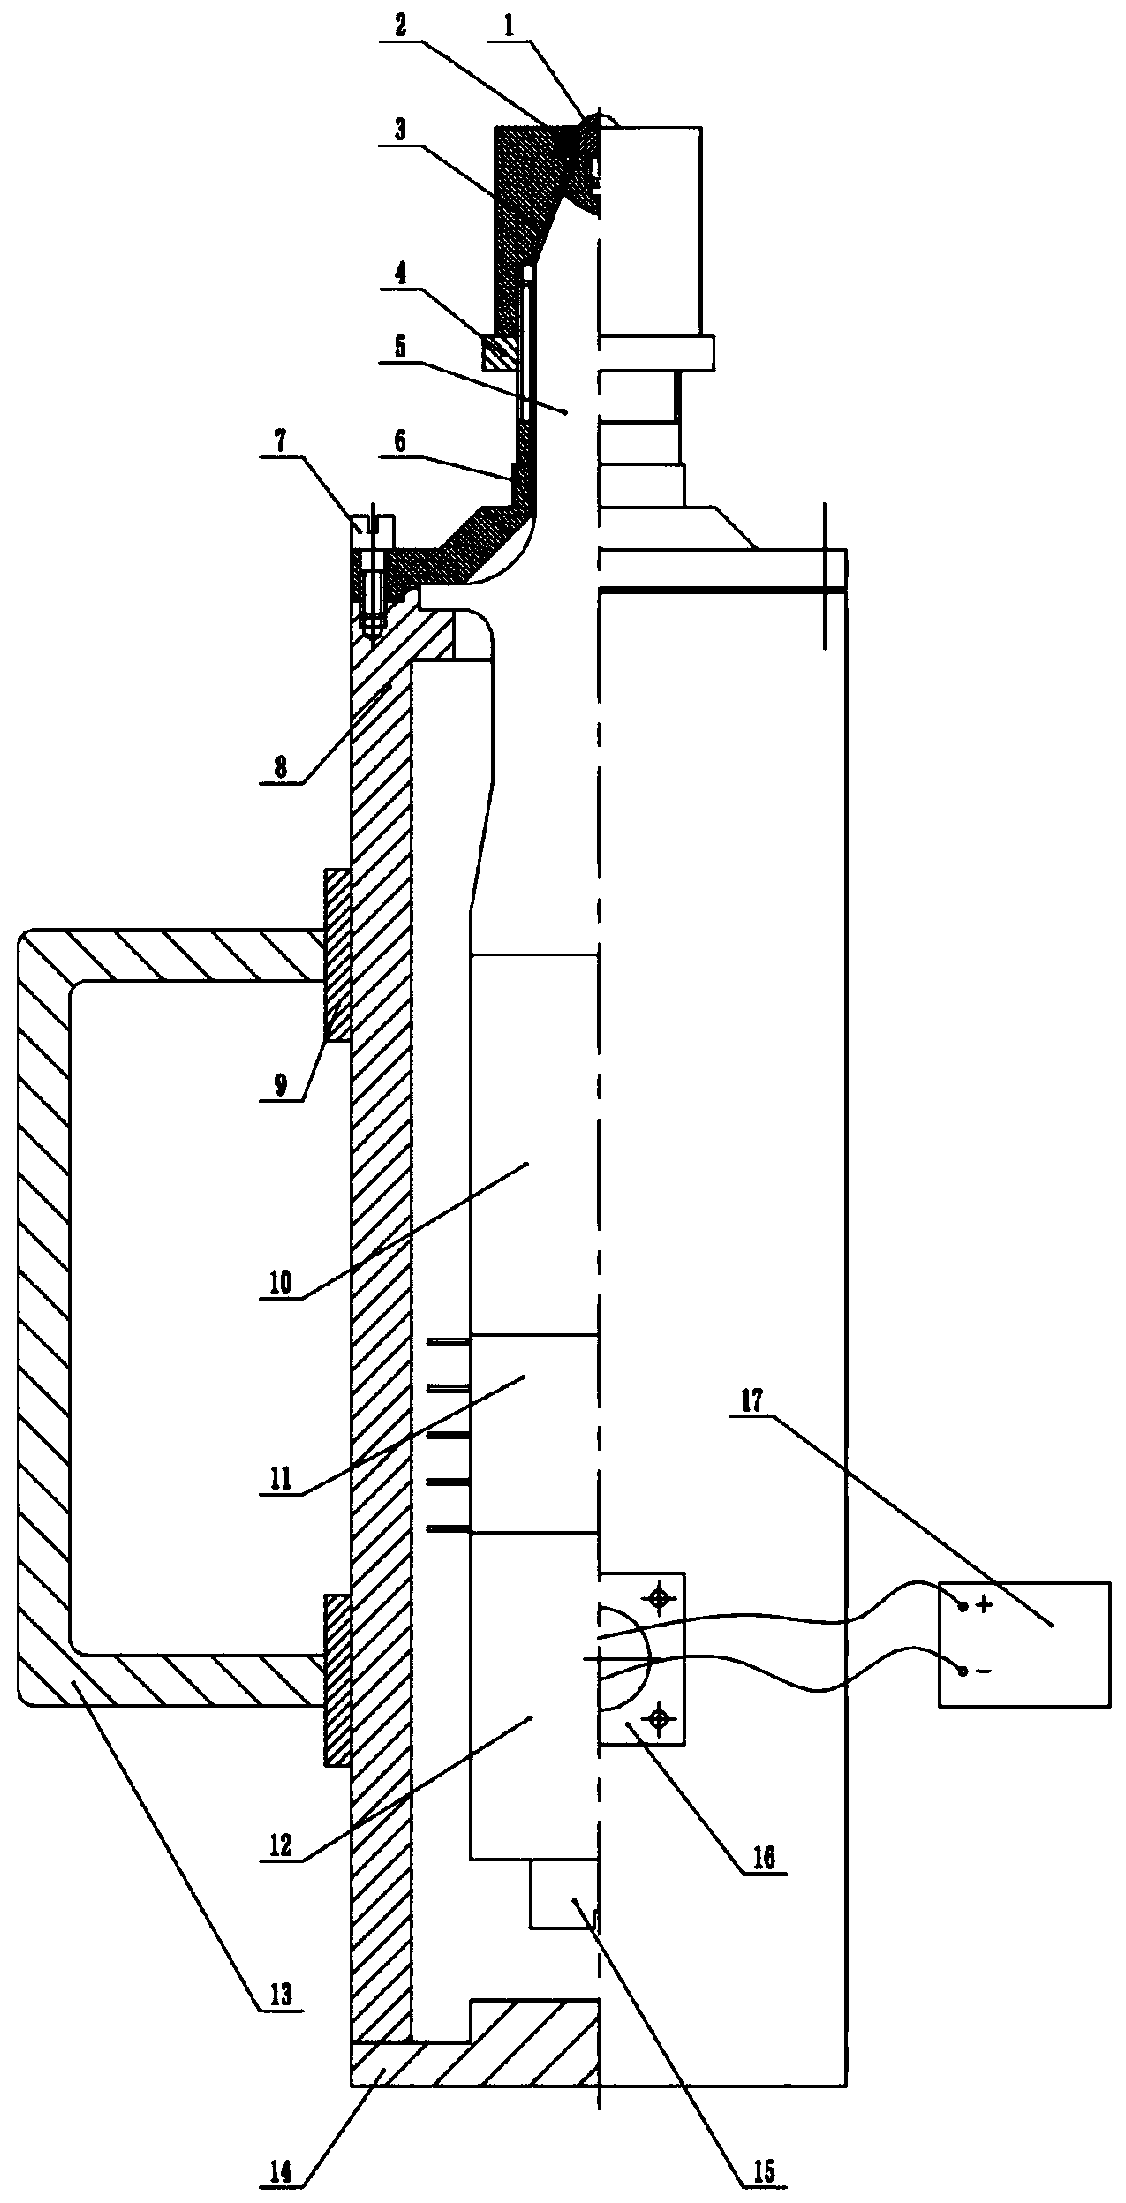 Self-lubricating-type ultrasonic rolling device with micro-array structure on tool head